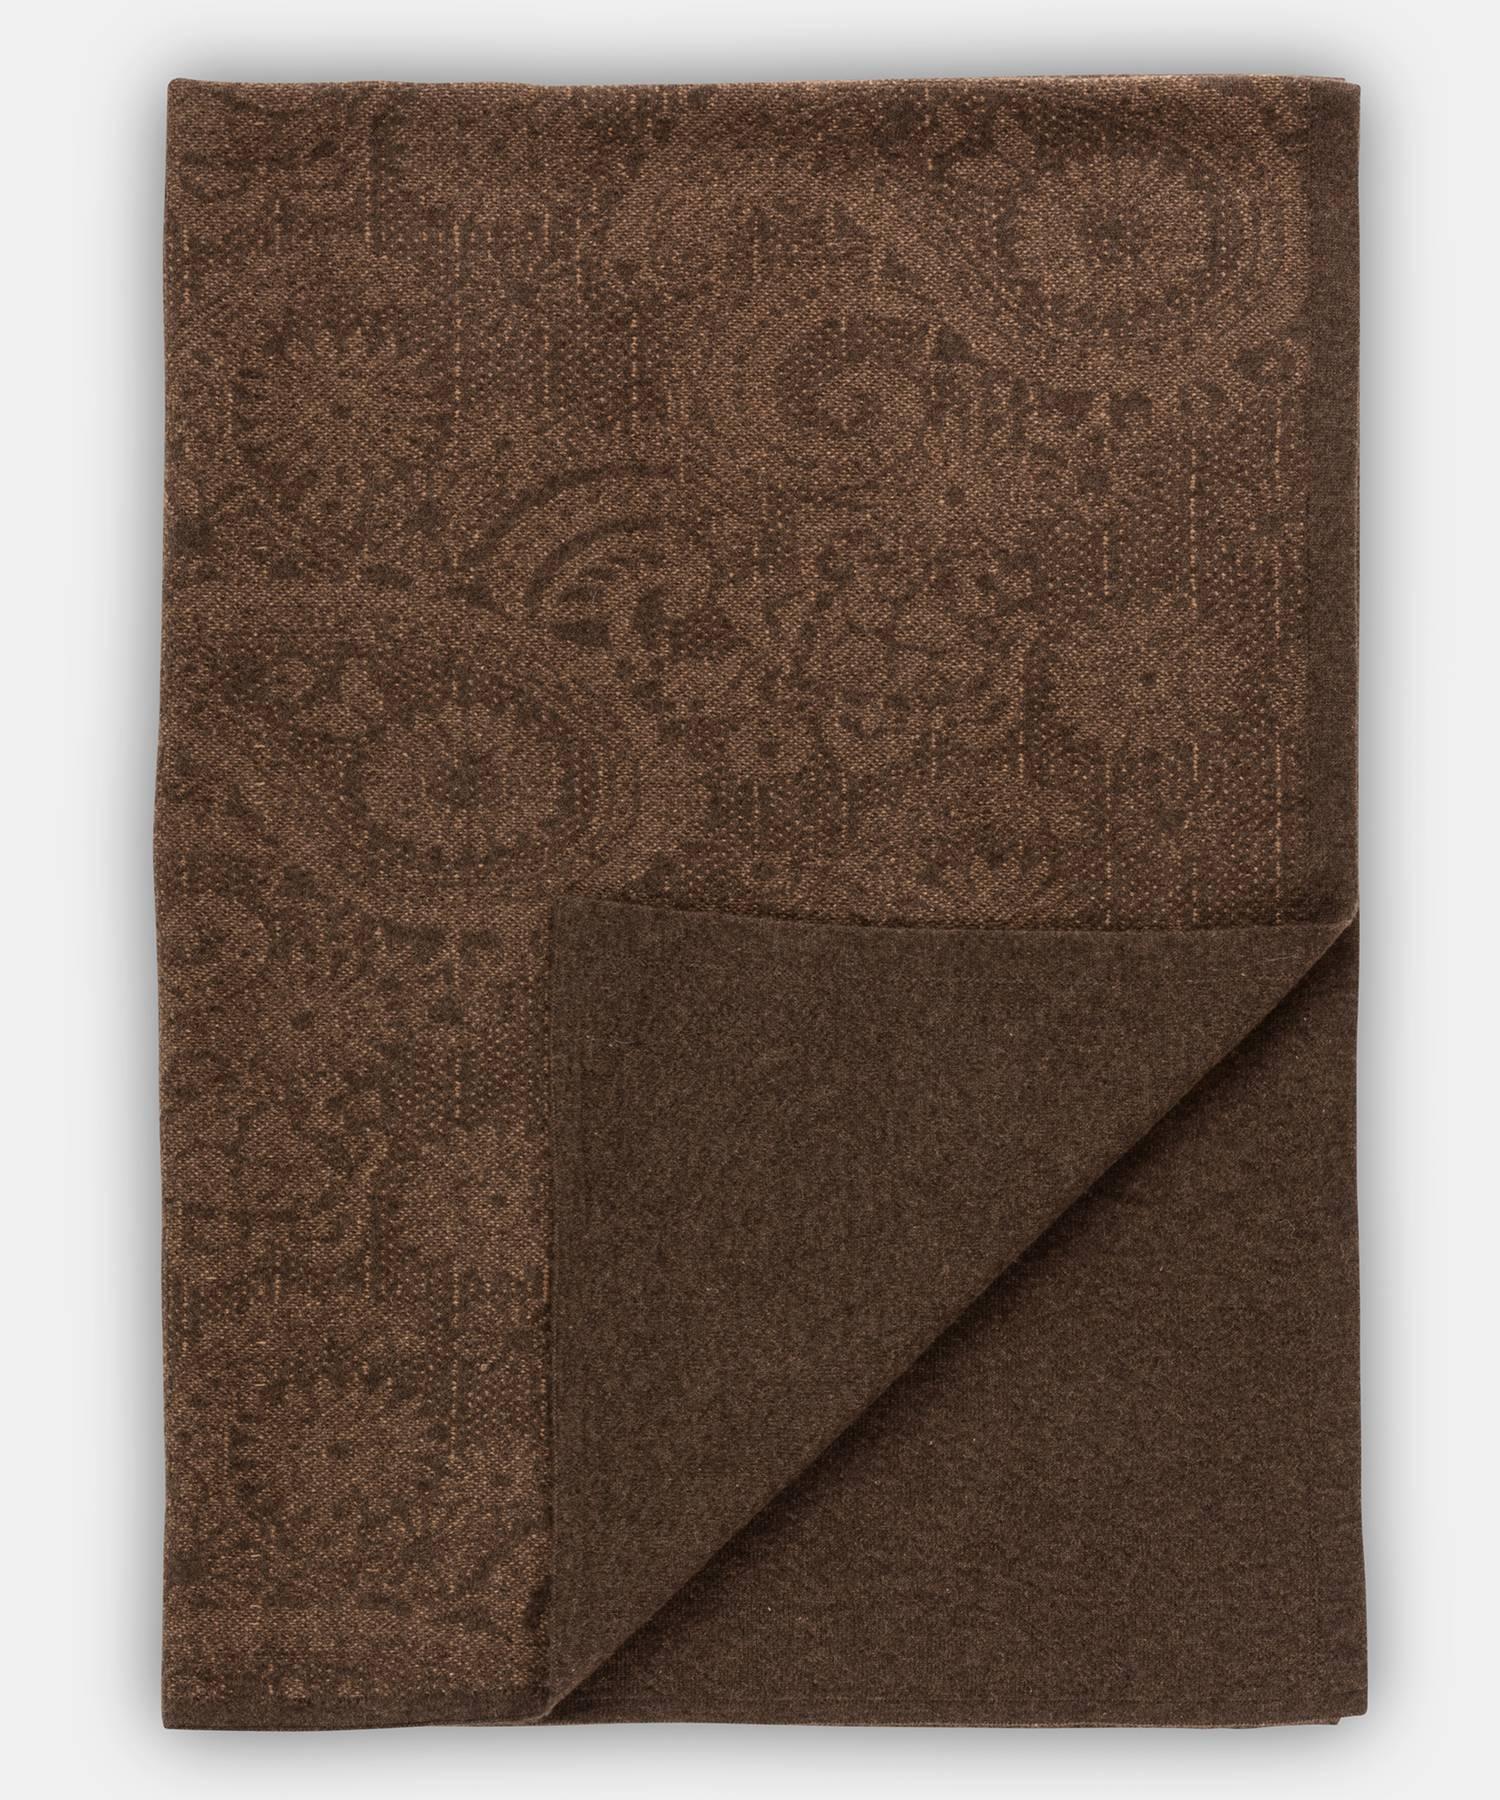 Paisley blanket by Saved, New York

A rich, tonal and oversized paisley motif. Available in King and Queen sizes, please inquire for pricing, availability, and lead time.

100% cashmere

Measure: 51